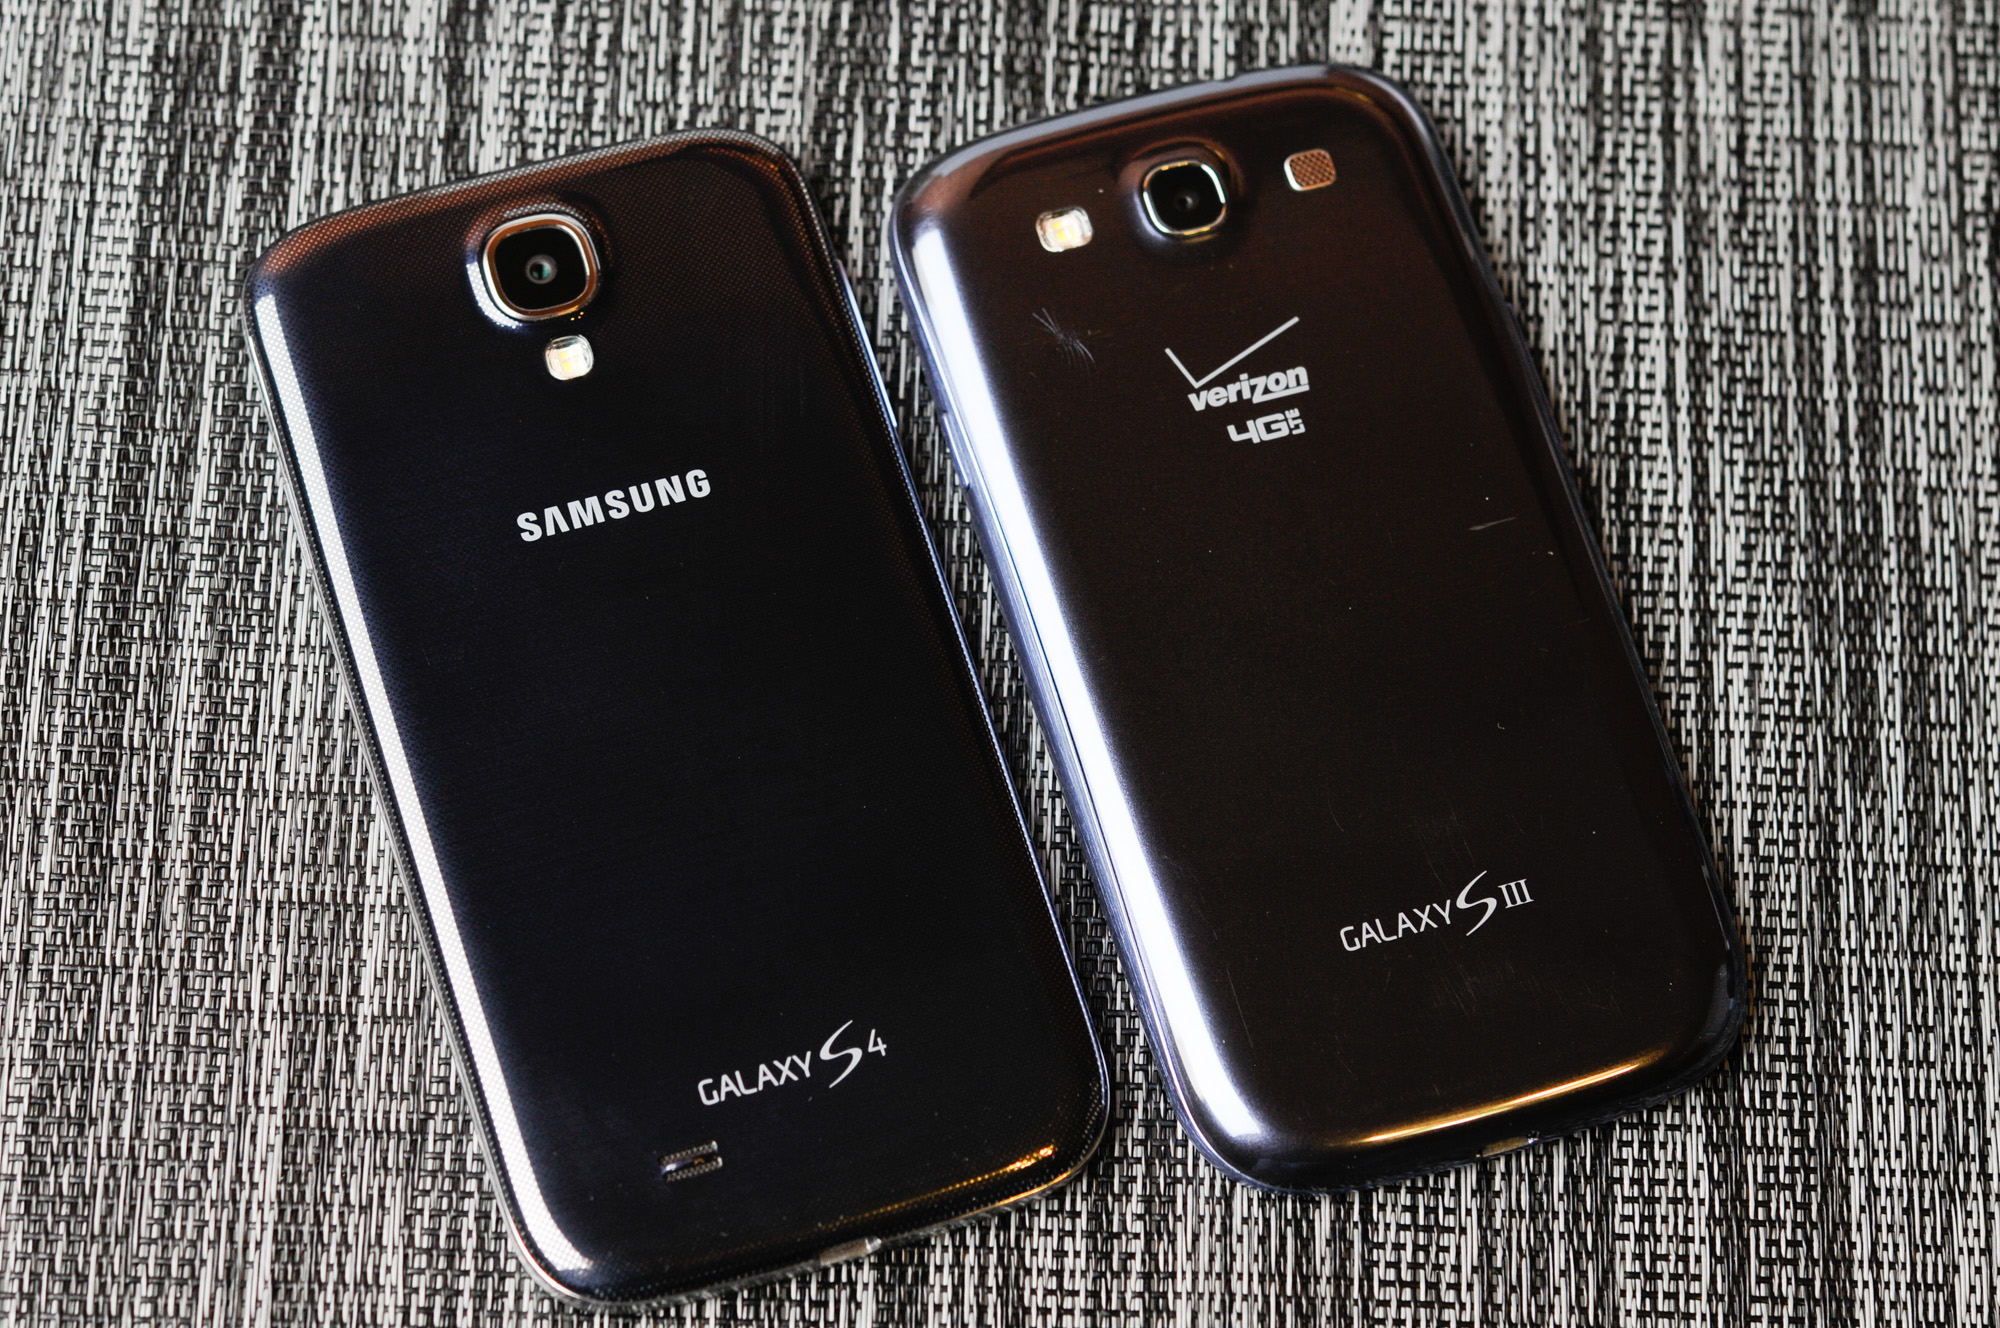 Samsung Galaxy S Review - Part 1